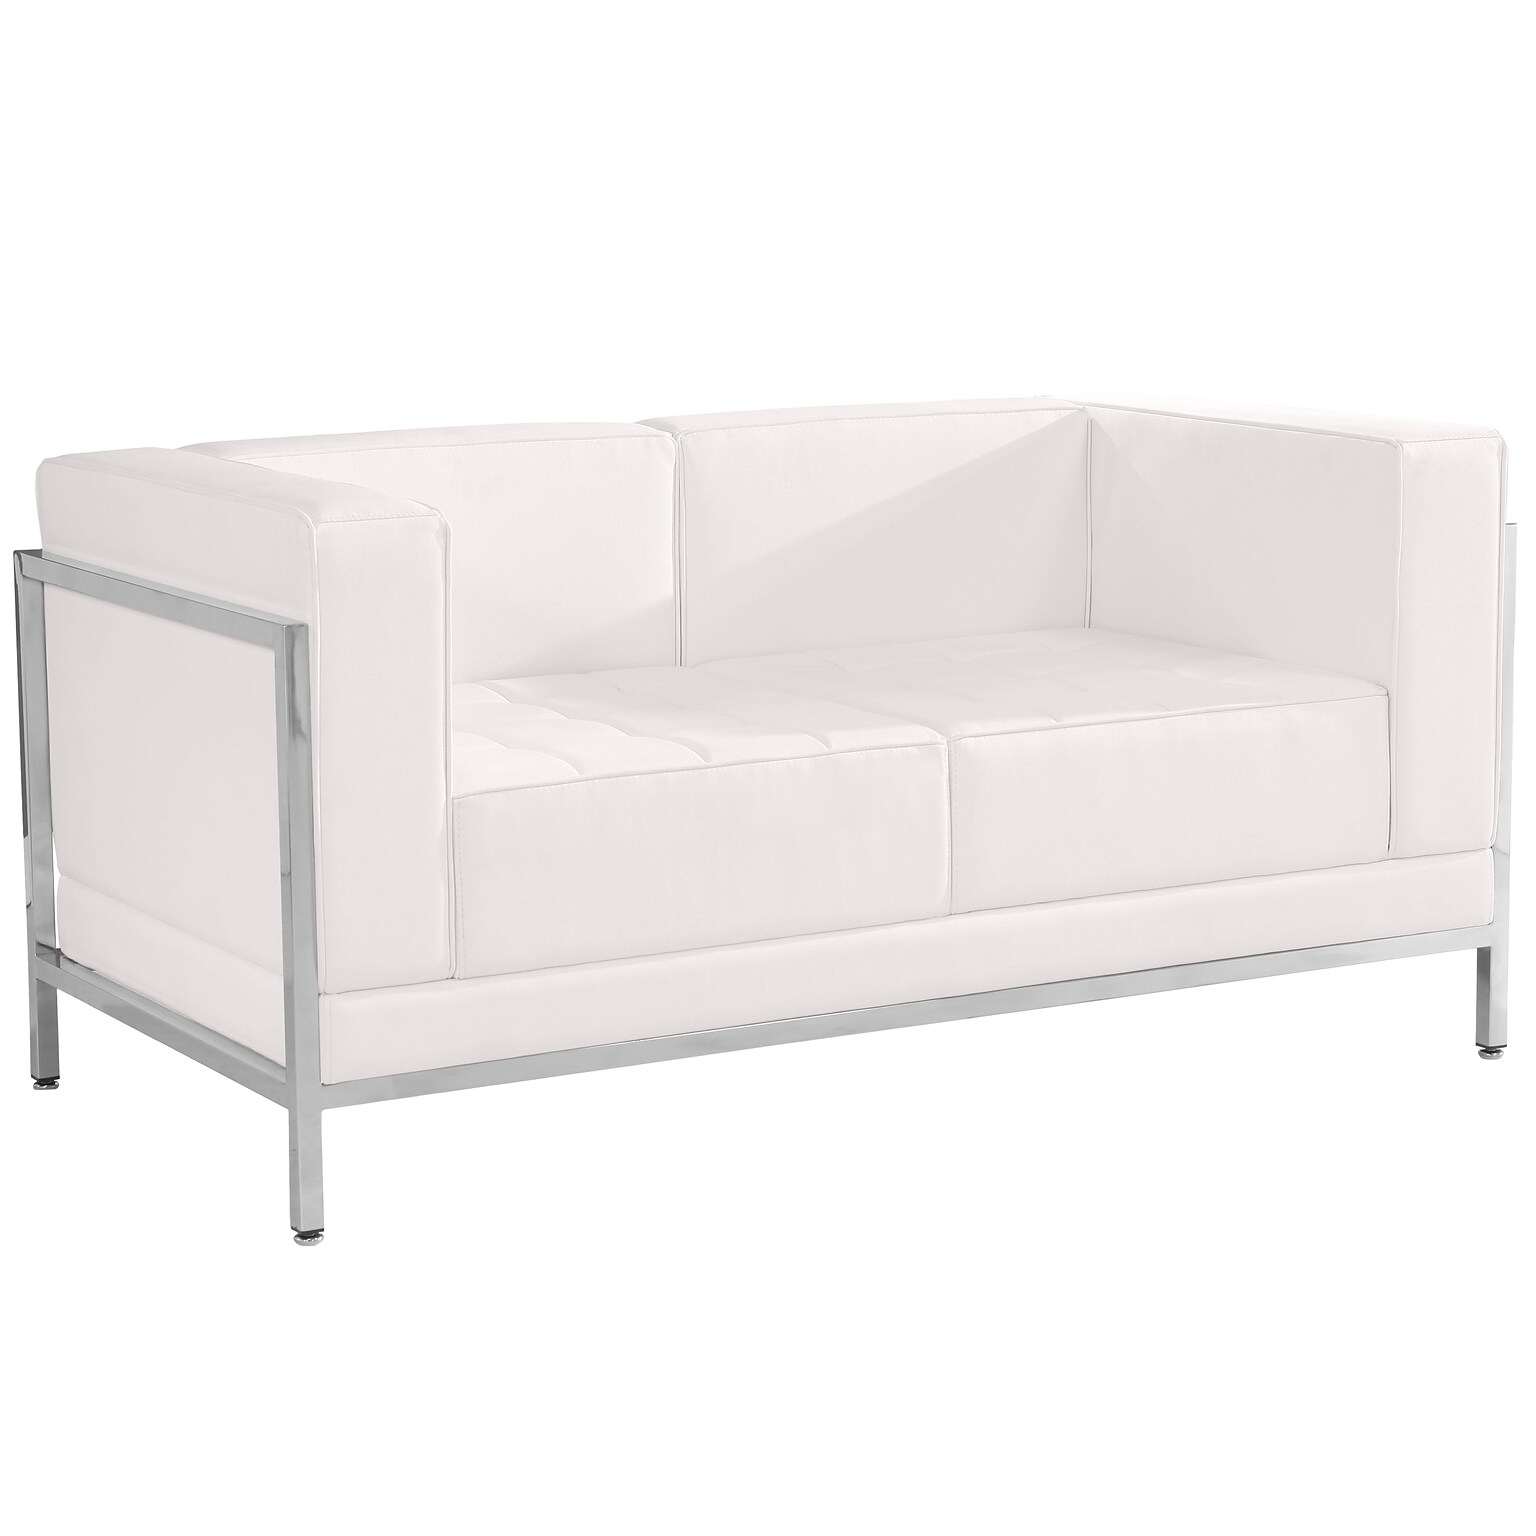 Flash Furniture HERCULES Imagination Series 57 LeatherSoft Loveseat with Encasing Frame, Melrose White (ZBIMAGLSWH)